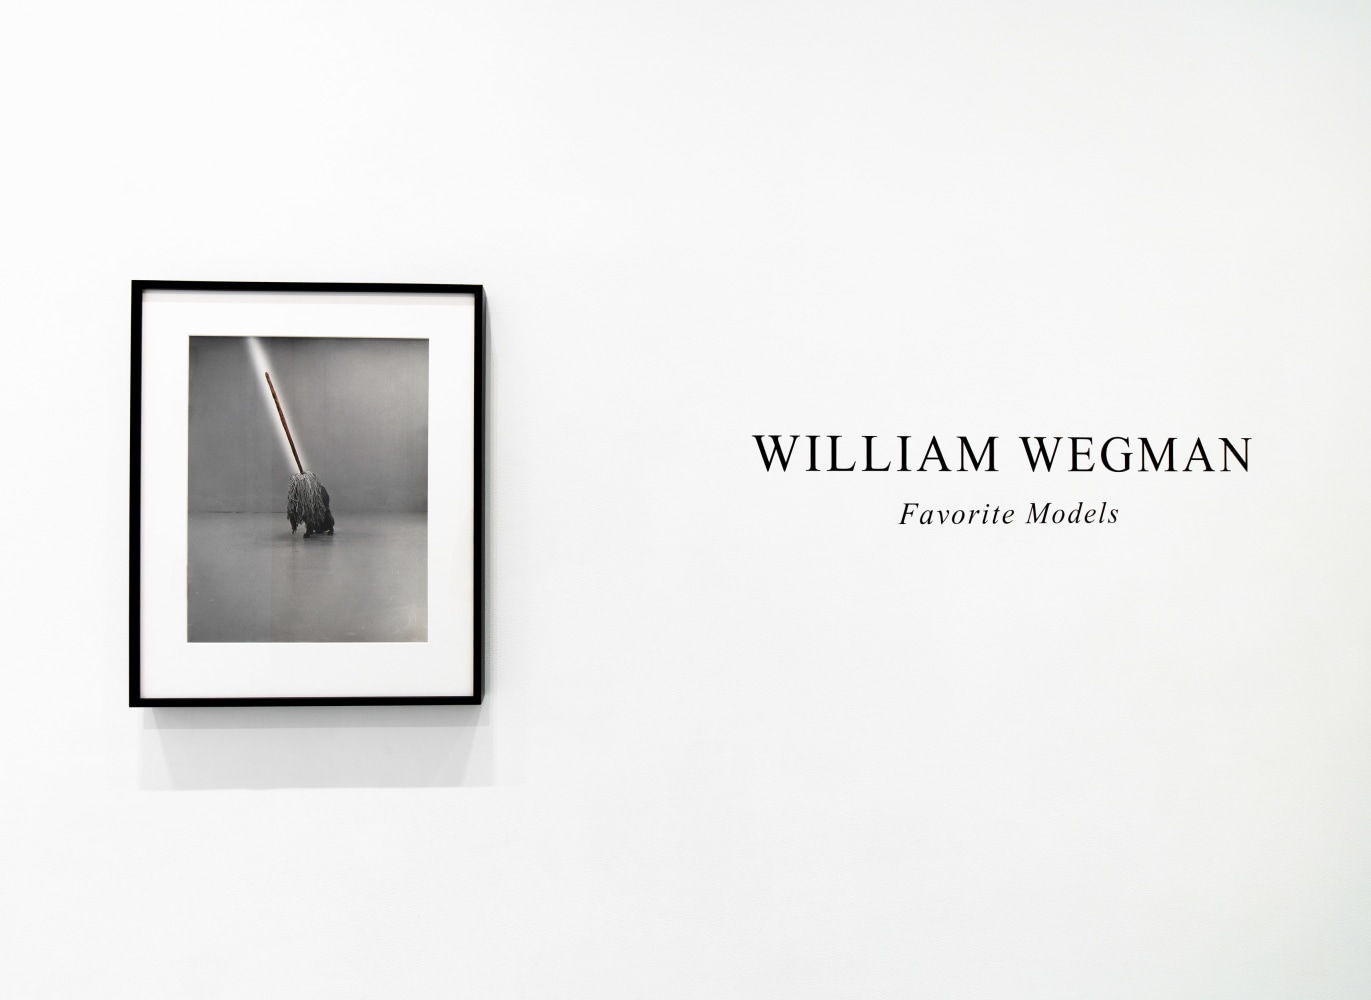 installation view of a black and white photograph on the left and title of exhibition, &quot;William Wegman: Favorite Models&quot;, on the right